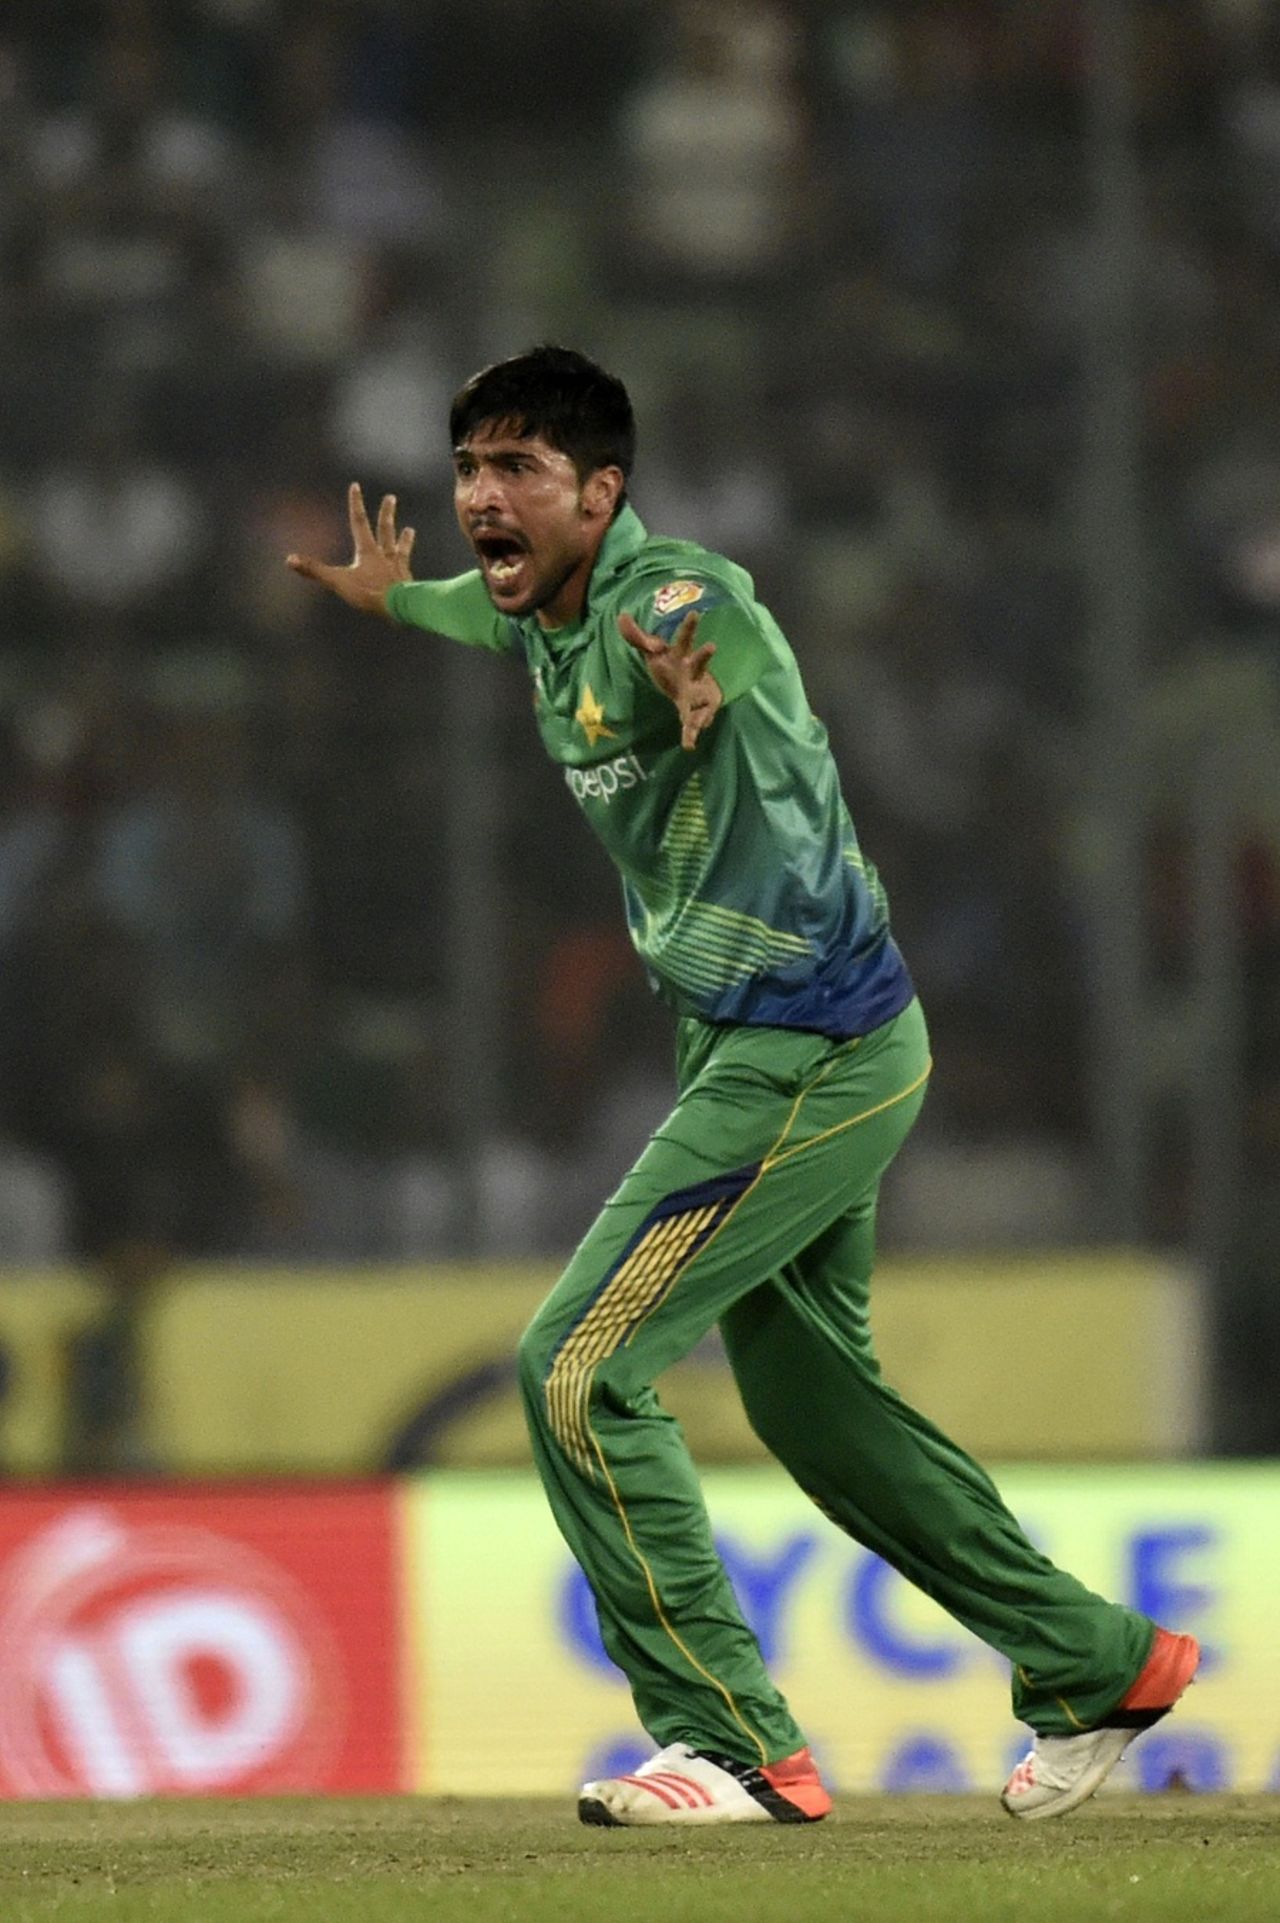 Mohammad Amir appeals for a wicket, Bangladesh v Pakistan, Asia Cup 2016, Mirpur, March 2, 2016